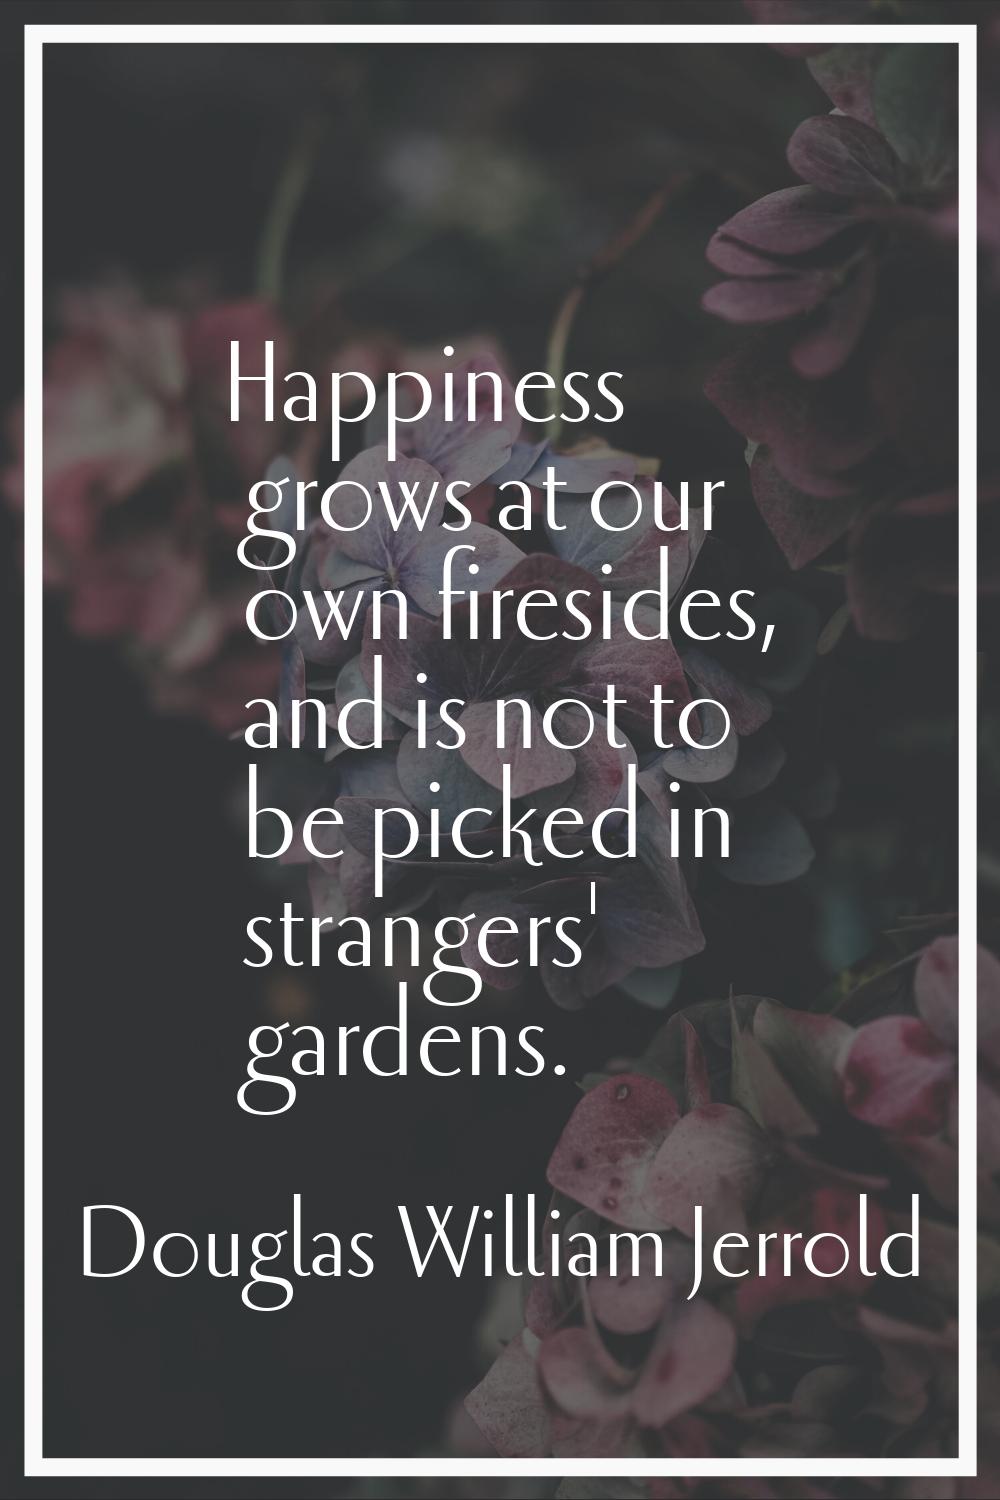 Happiness grows at our own firesides, and is not to be picked in strangers' gardens.